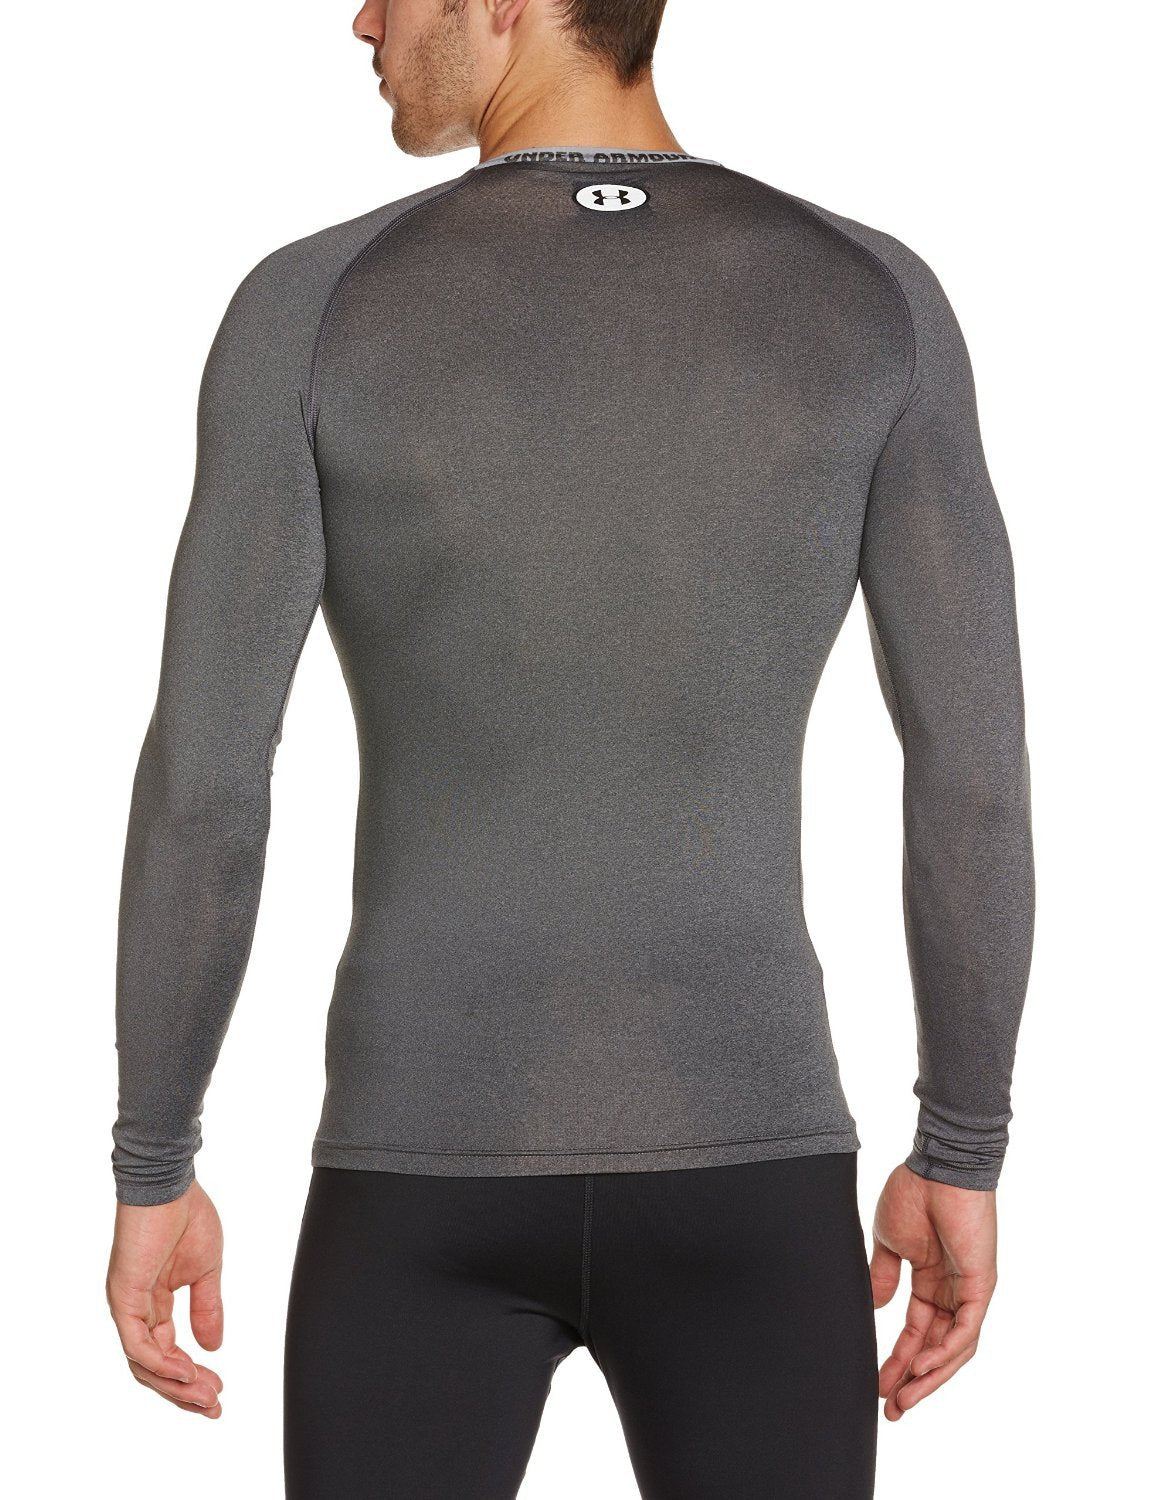 Under Armour Men's HeatGear® Sonic Compression Long Sleeve Fitted Shirt.